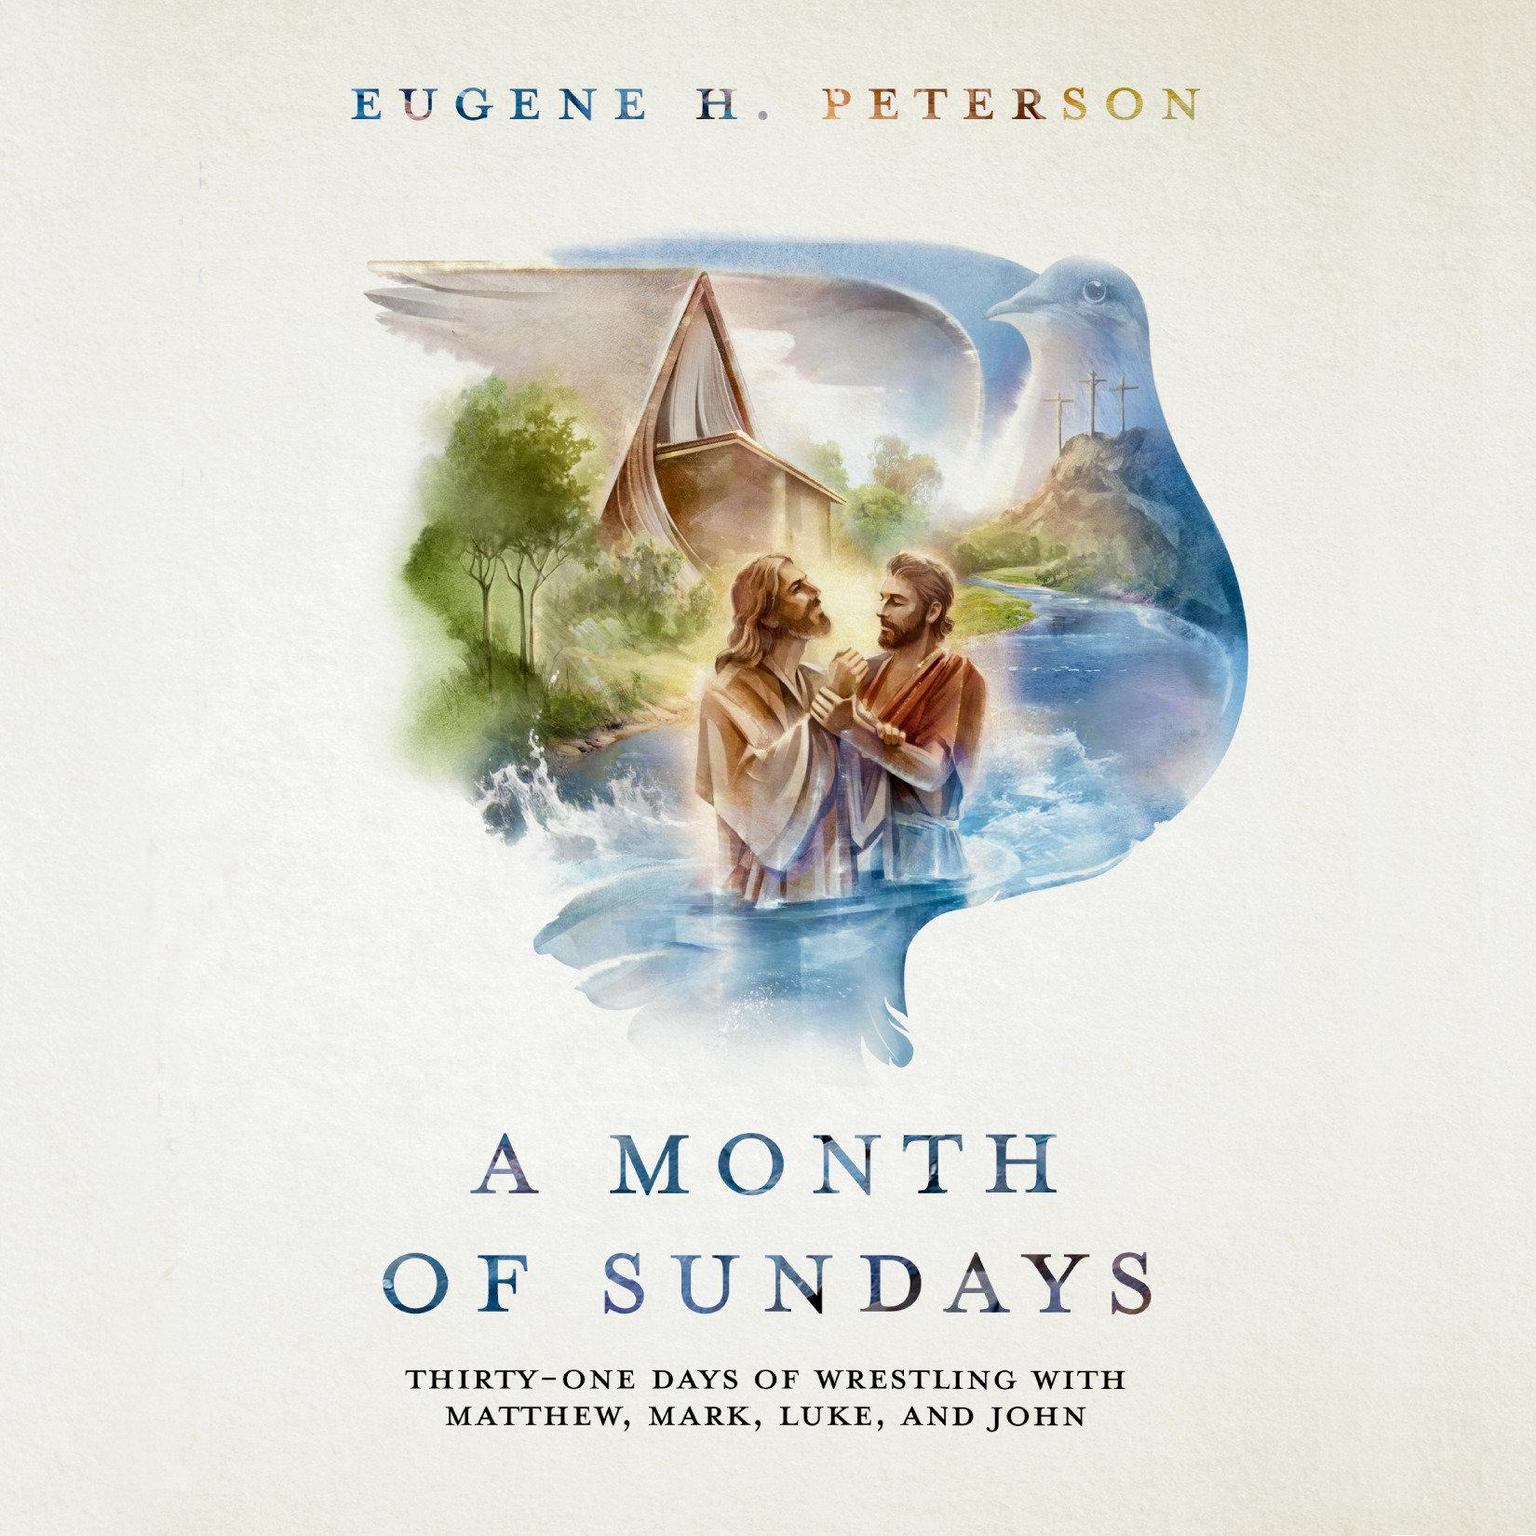 A Month of Sundays: Thirty-One Days of Wrestling with Matthew, Mark, Luke, and John Audiobook, by Eugene H. Peterson